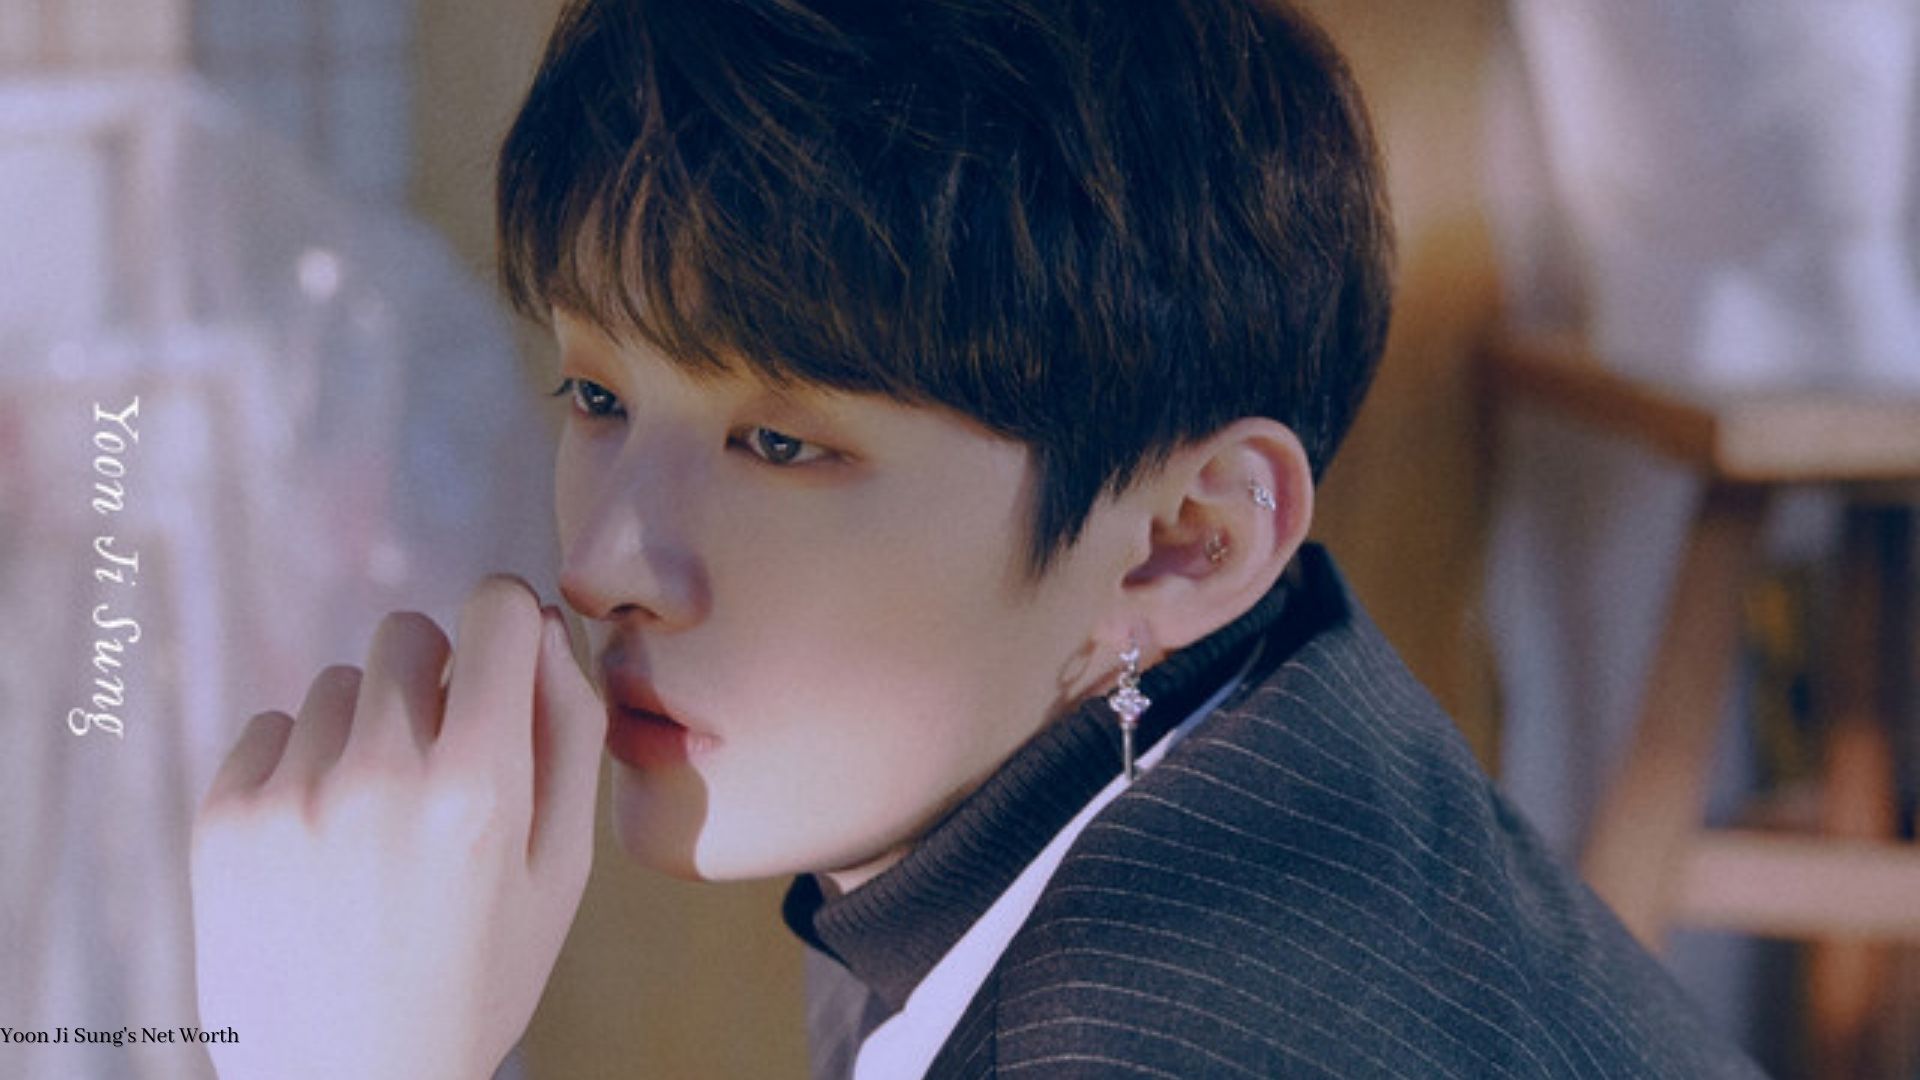 Yoon Ji Sung’s Net Worth: How Rich Is the Ex-Wanna One Leader?